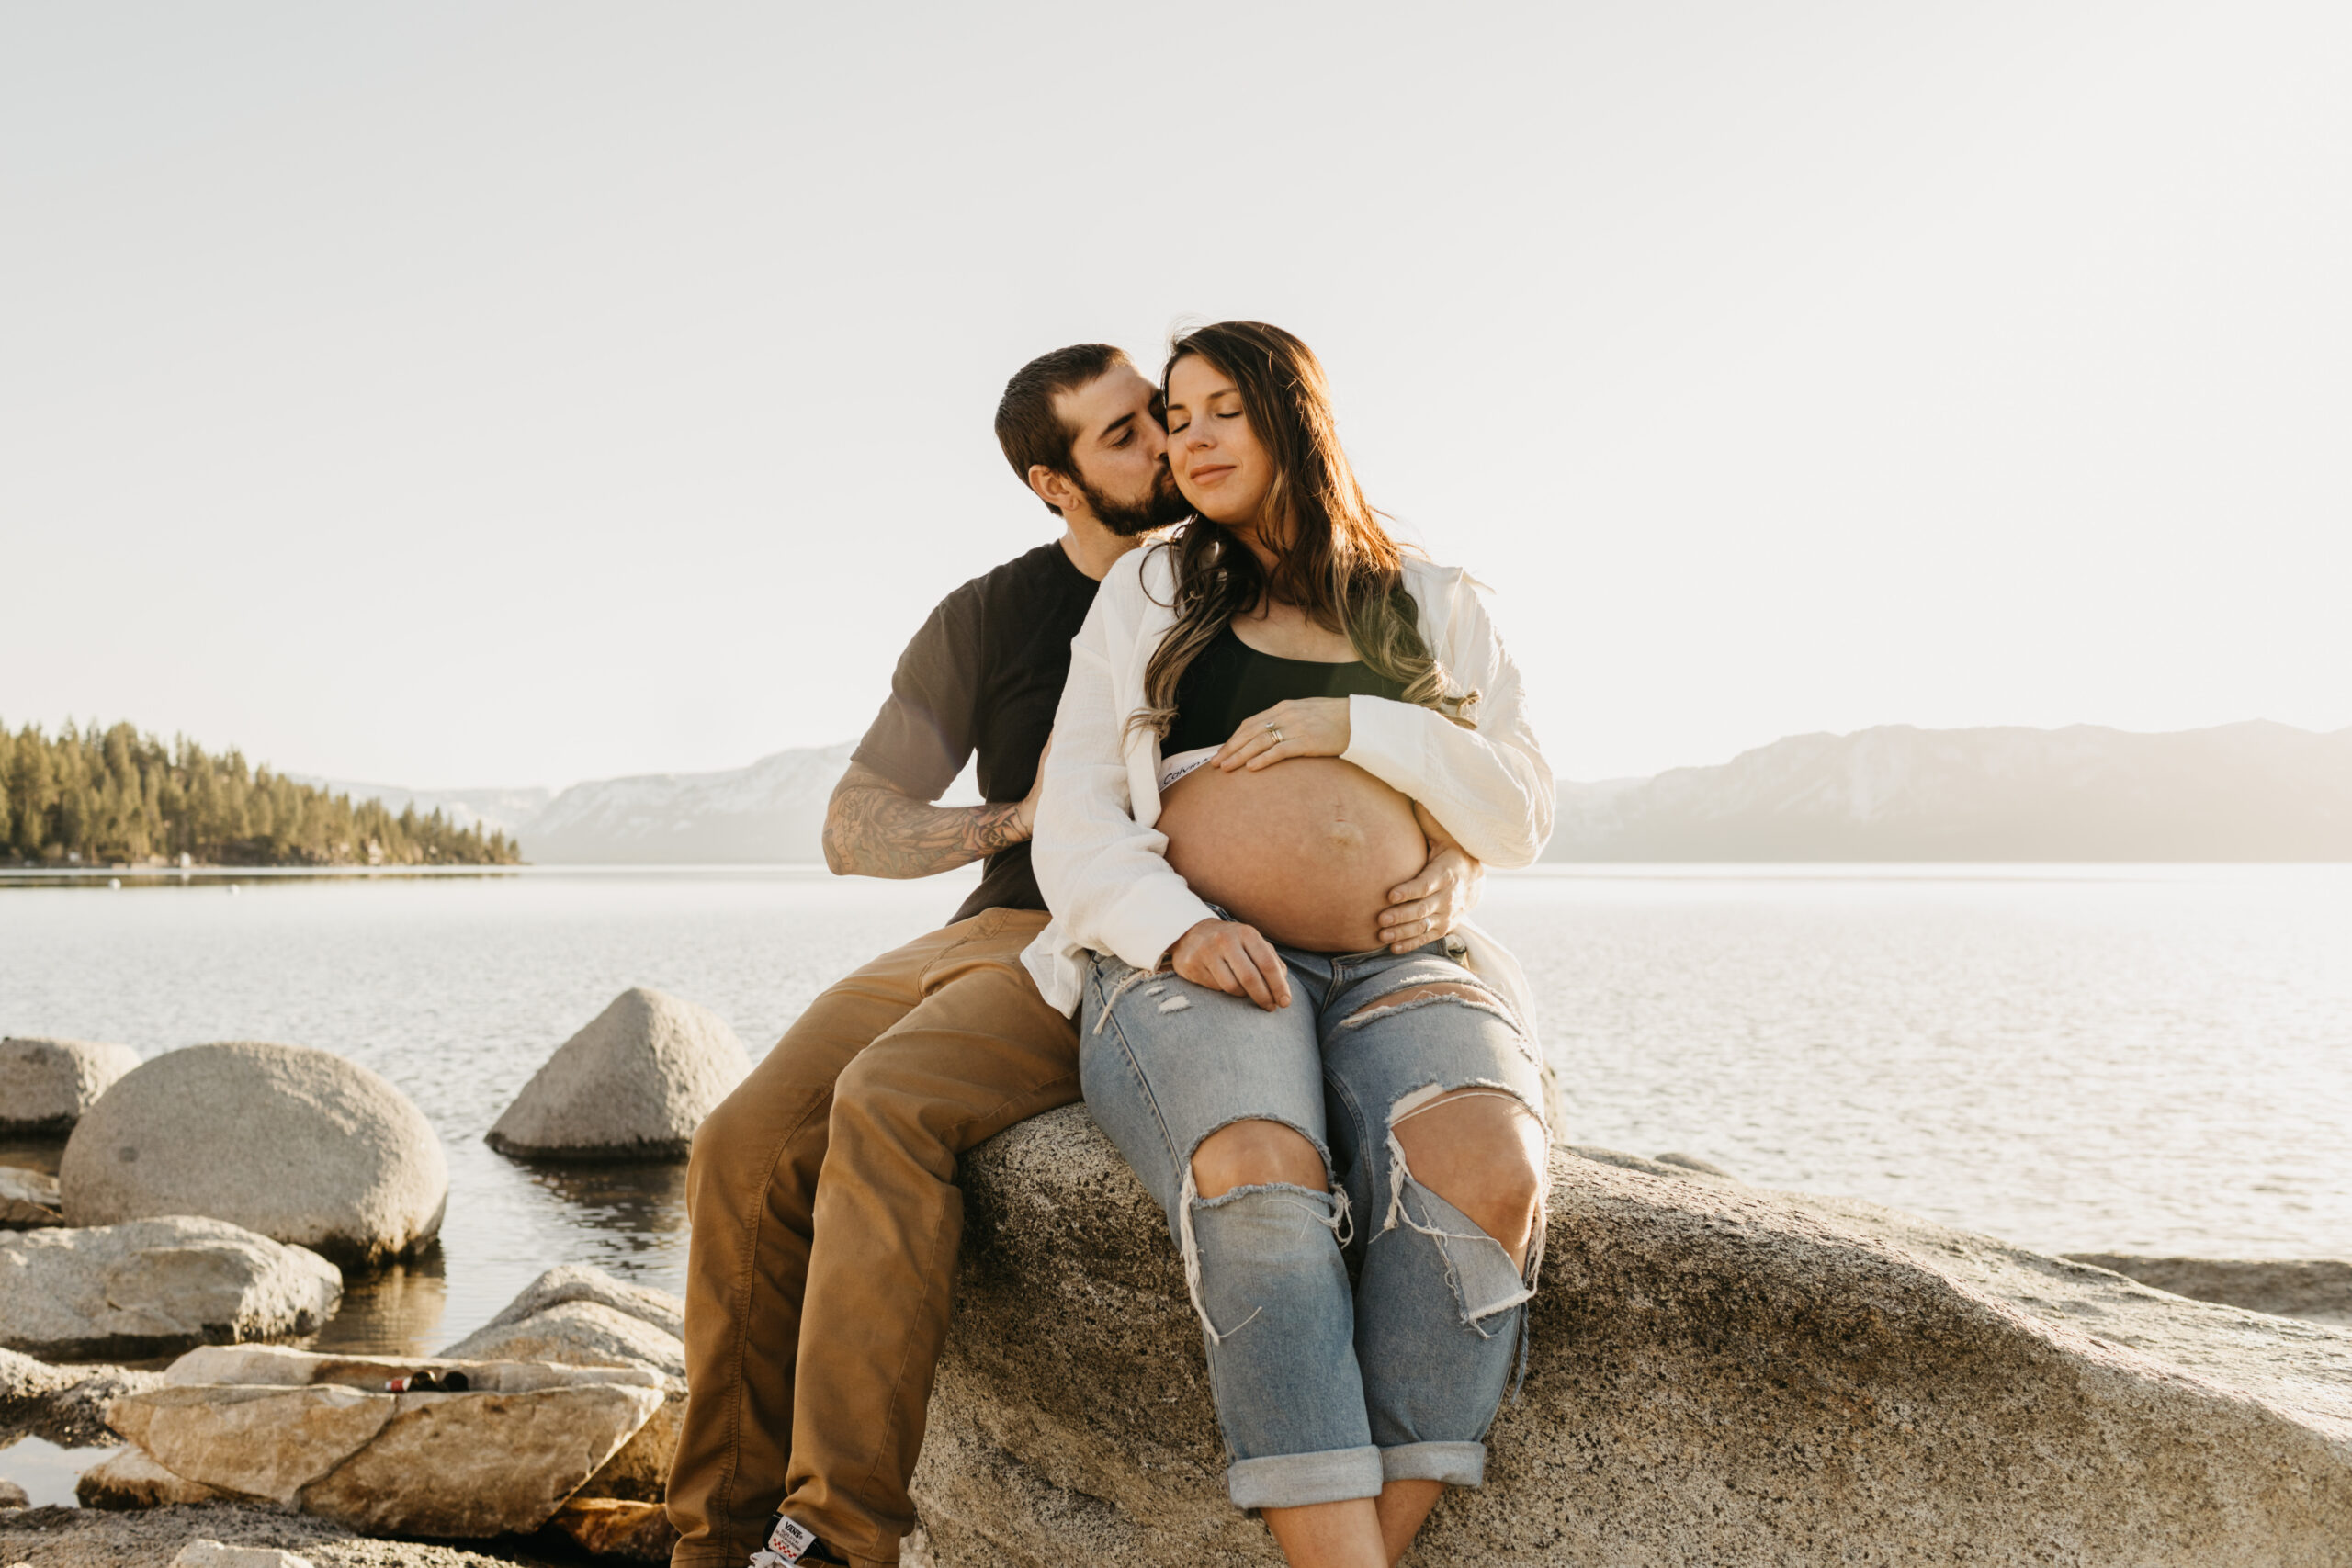 Zephyr Cove Maternity Shoot in South Lake Tahoe